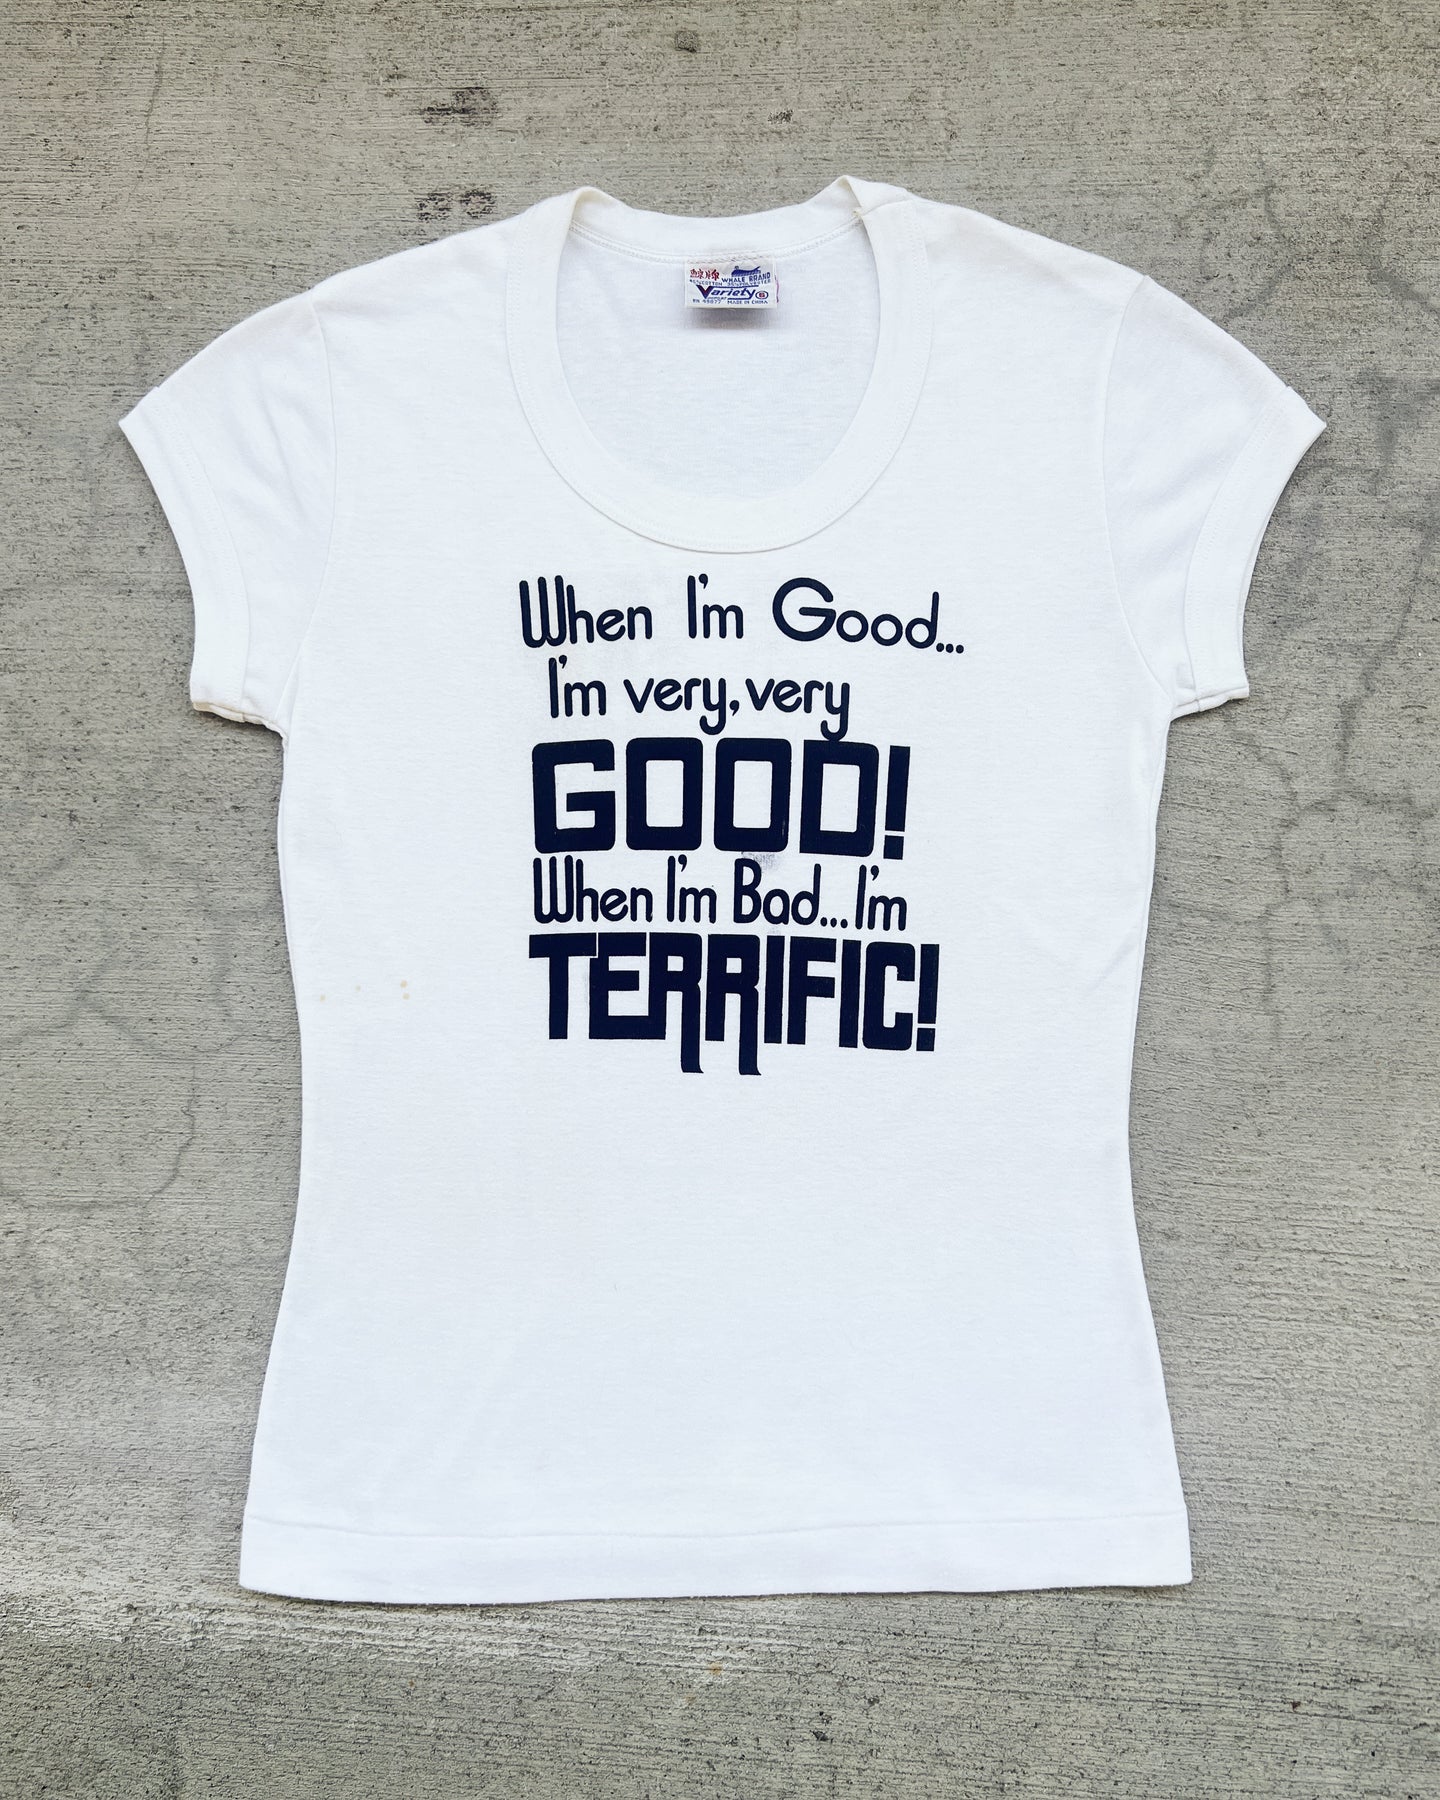 1980s When I'm Good... Single Stitch Baby Tee - Size X-Small